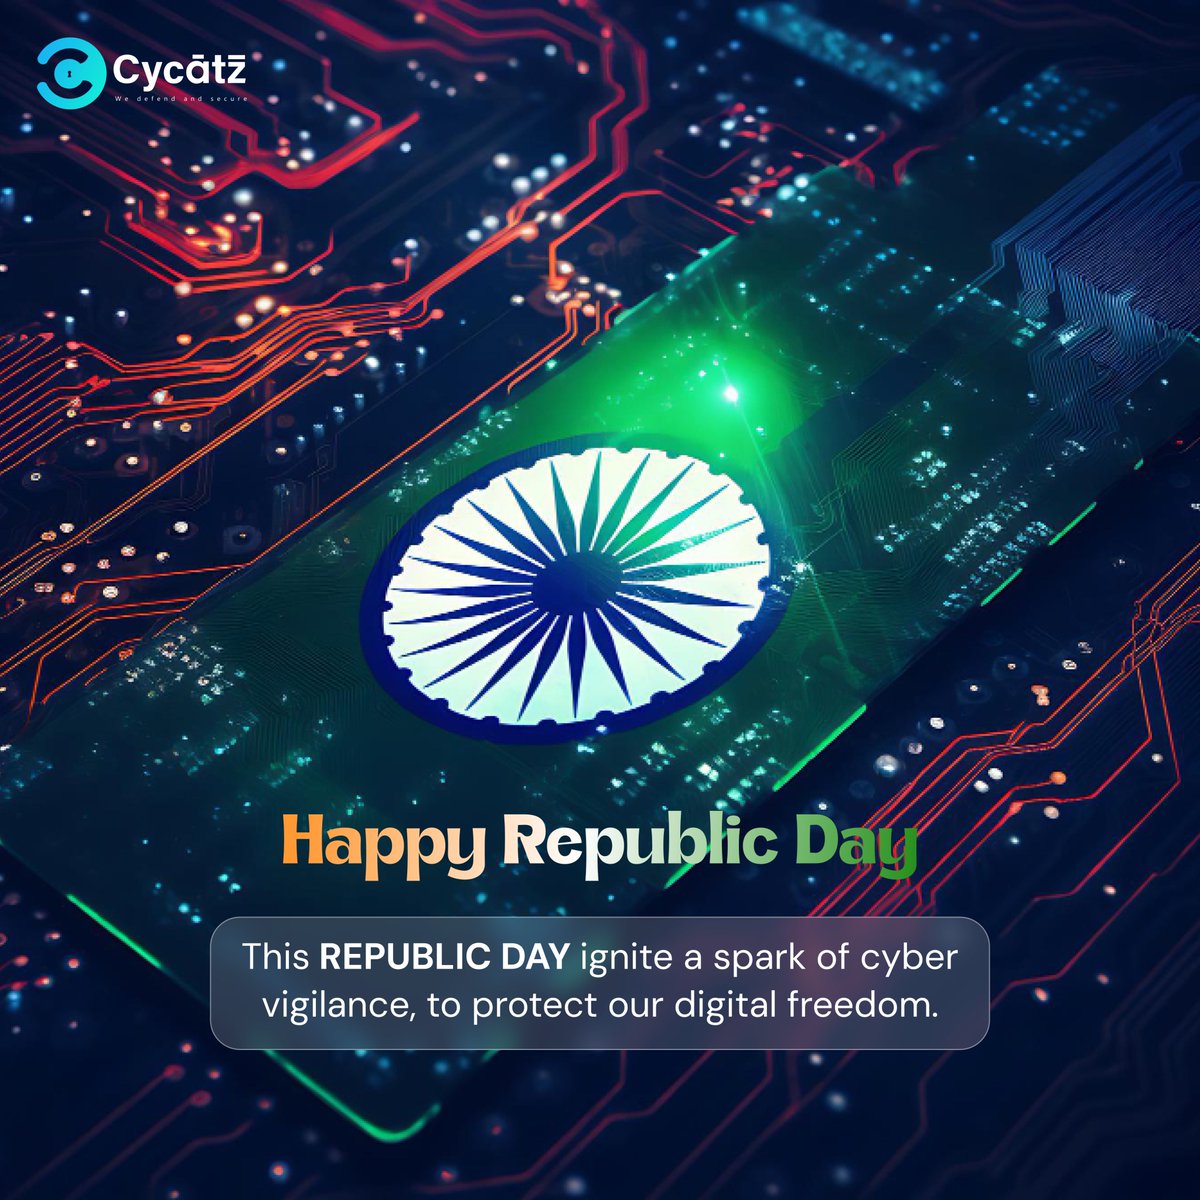 #CyCatz #Cybersecurity Happy Republic Day! 

Just as our nation stands strong with its principles, may your cybersecurity defenses be unyielding. Jai Hind! 🇮🇳🔐
 
#cyberawareness #cyberattack #mobilesecurity #emailsecurity #vendorriskmanagement #BrandMonitoring #RepublicDay